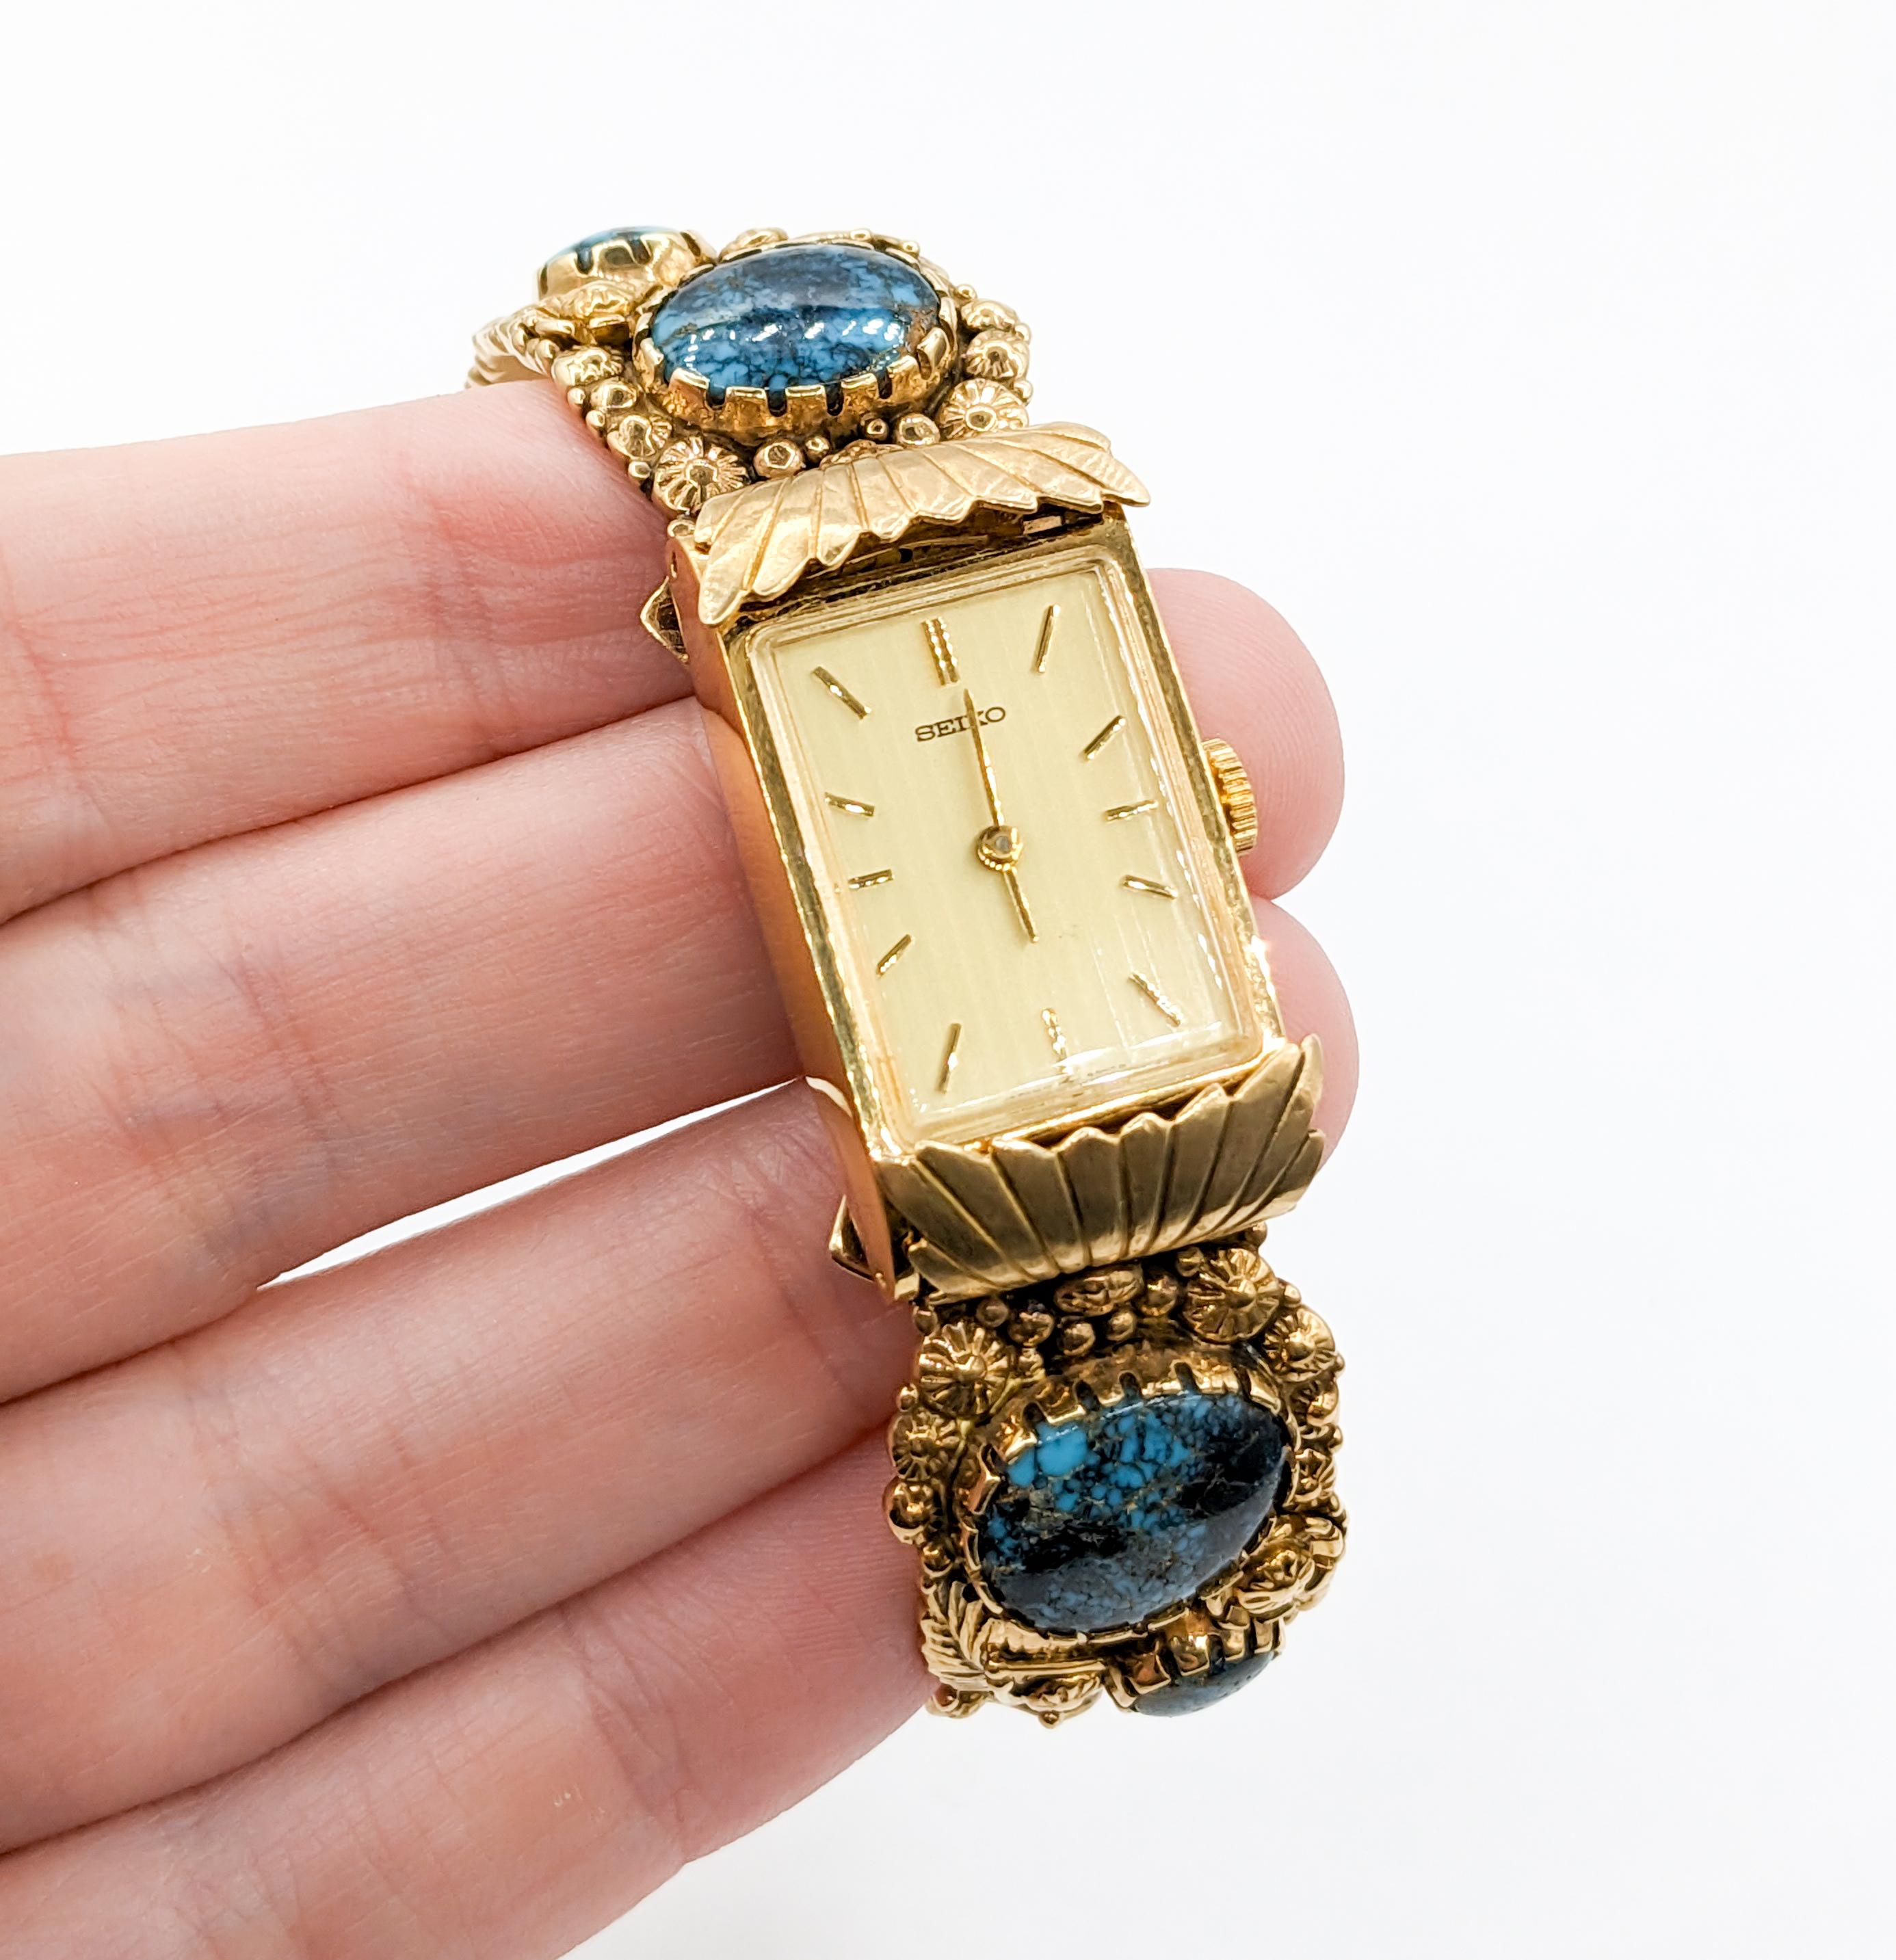 Boyd Tsosie Turquoise & 14K Gold Cuff with Seiko Timepiece

Experience timeless elegance with this Boyd Tsosie bangle. Meticulously crafted in 14k yellow gold, it showcases vibrant turquoise embellishments paired with the reliable precision of a